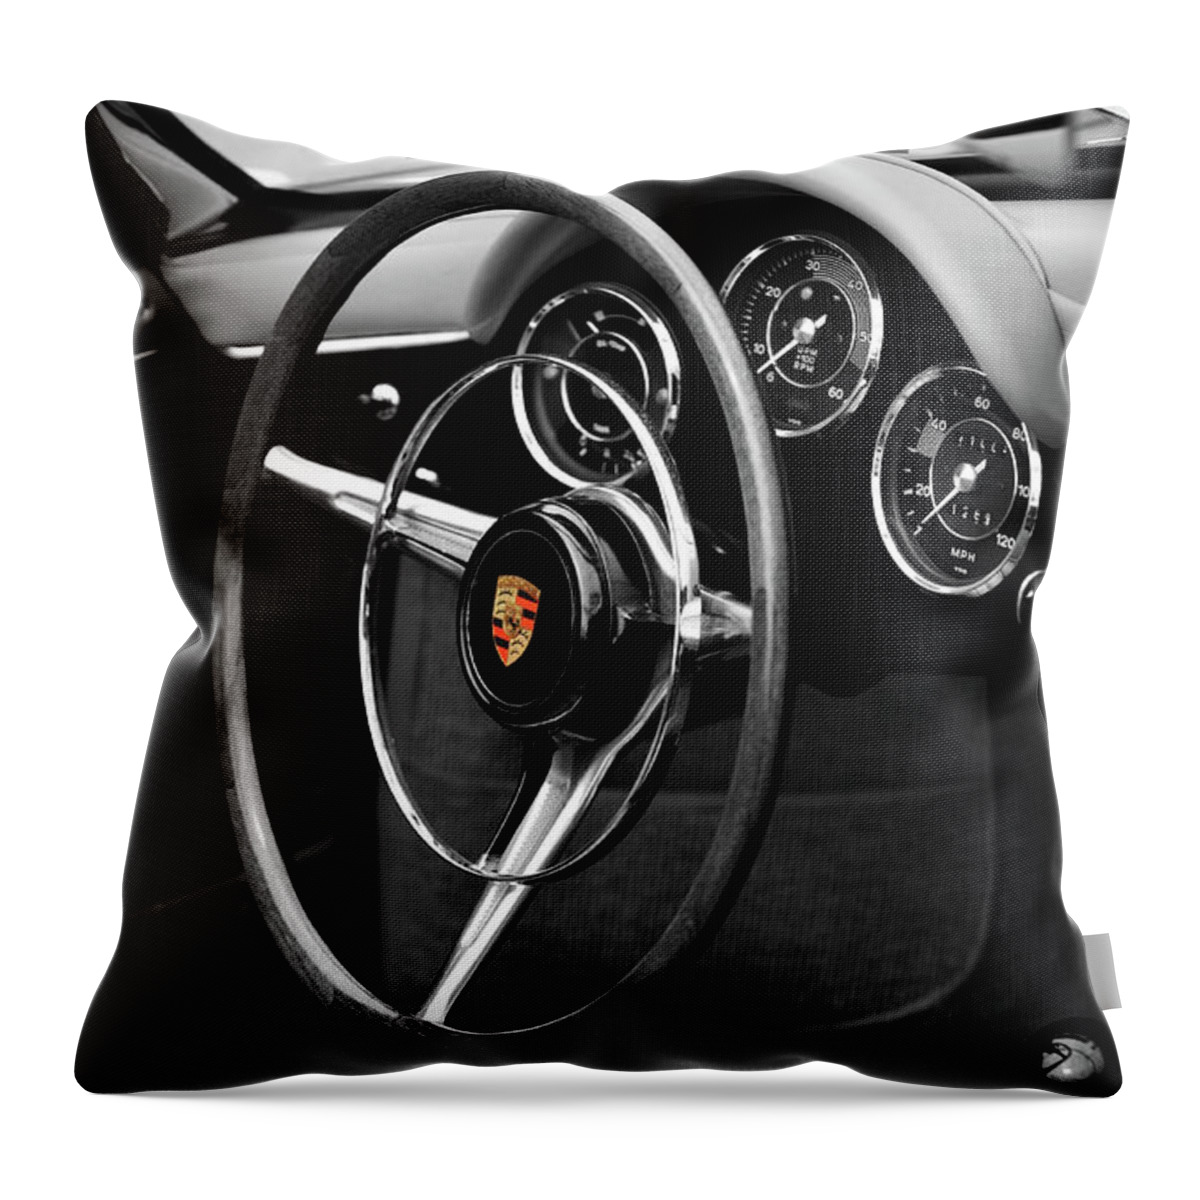 Porsche 356 Roadster Throw Pillow featuring the photograph The 356 Roadster by Mark Rogan